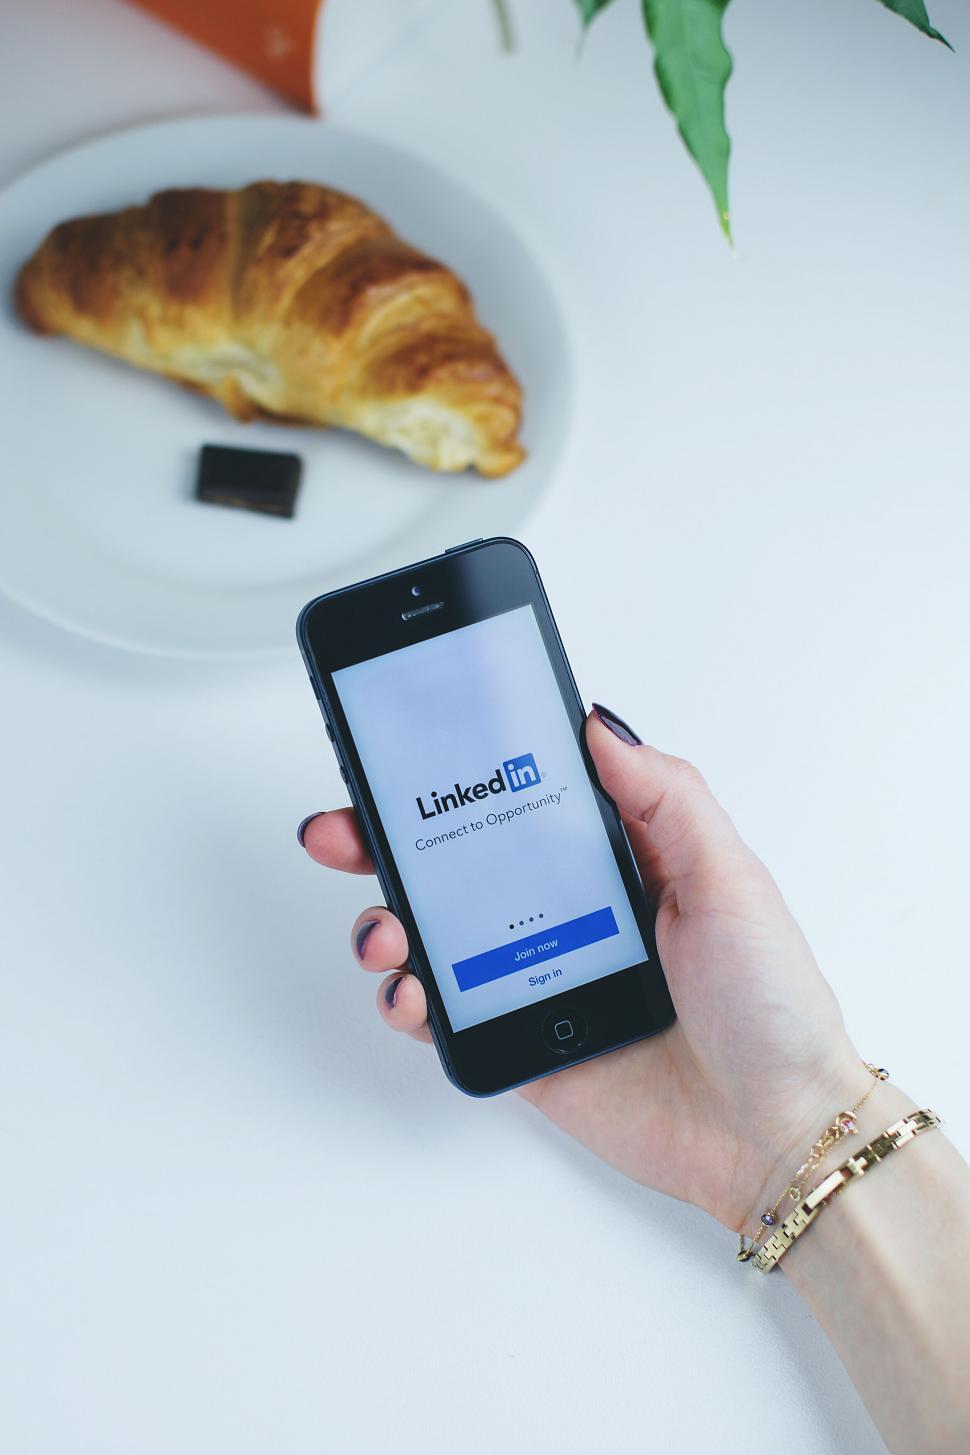 Free Image of Hand holding smartphone with LinkedIn on screen 